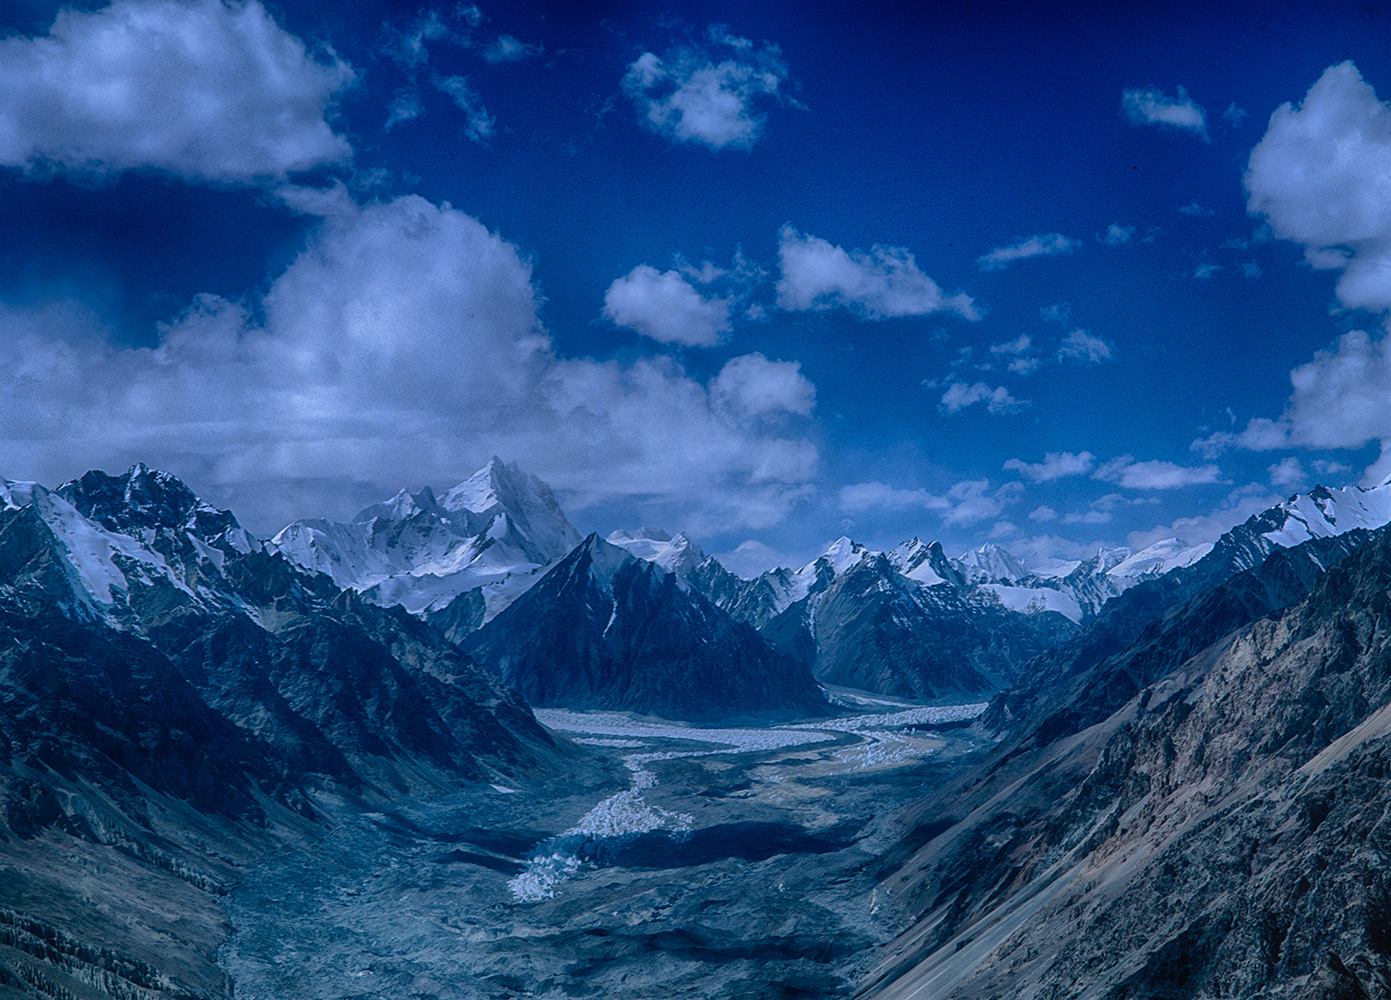 Looking south towards The Fang and the Pakistan Karakoram from above Sughet Jangal